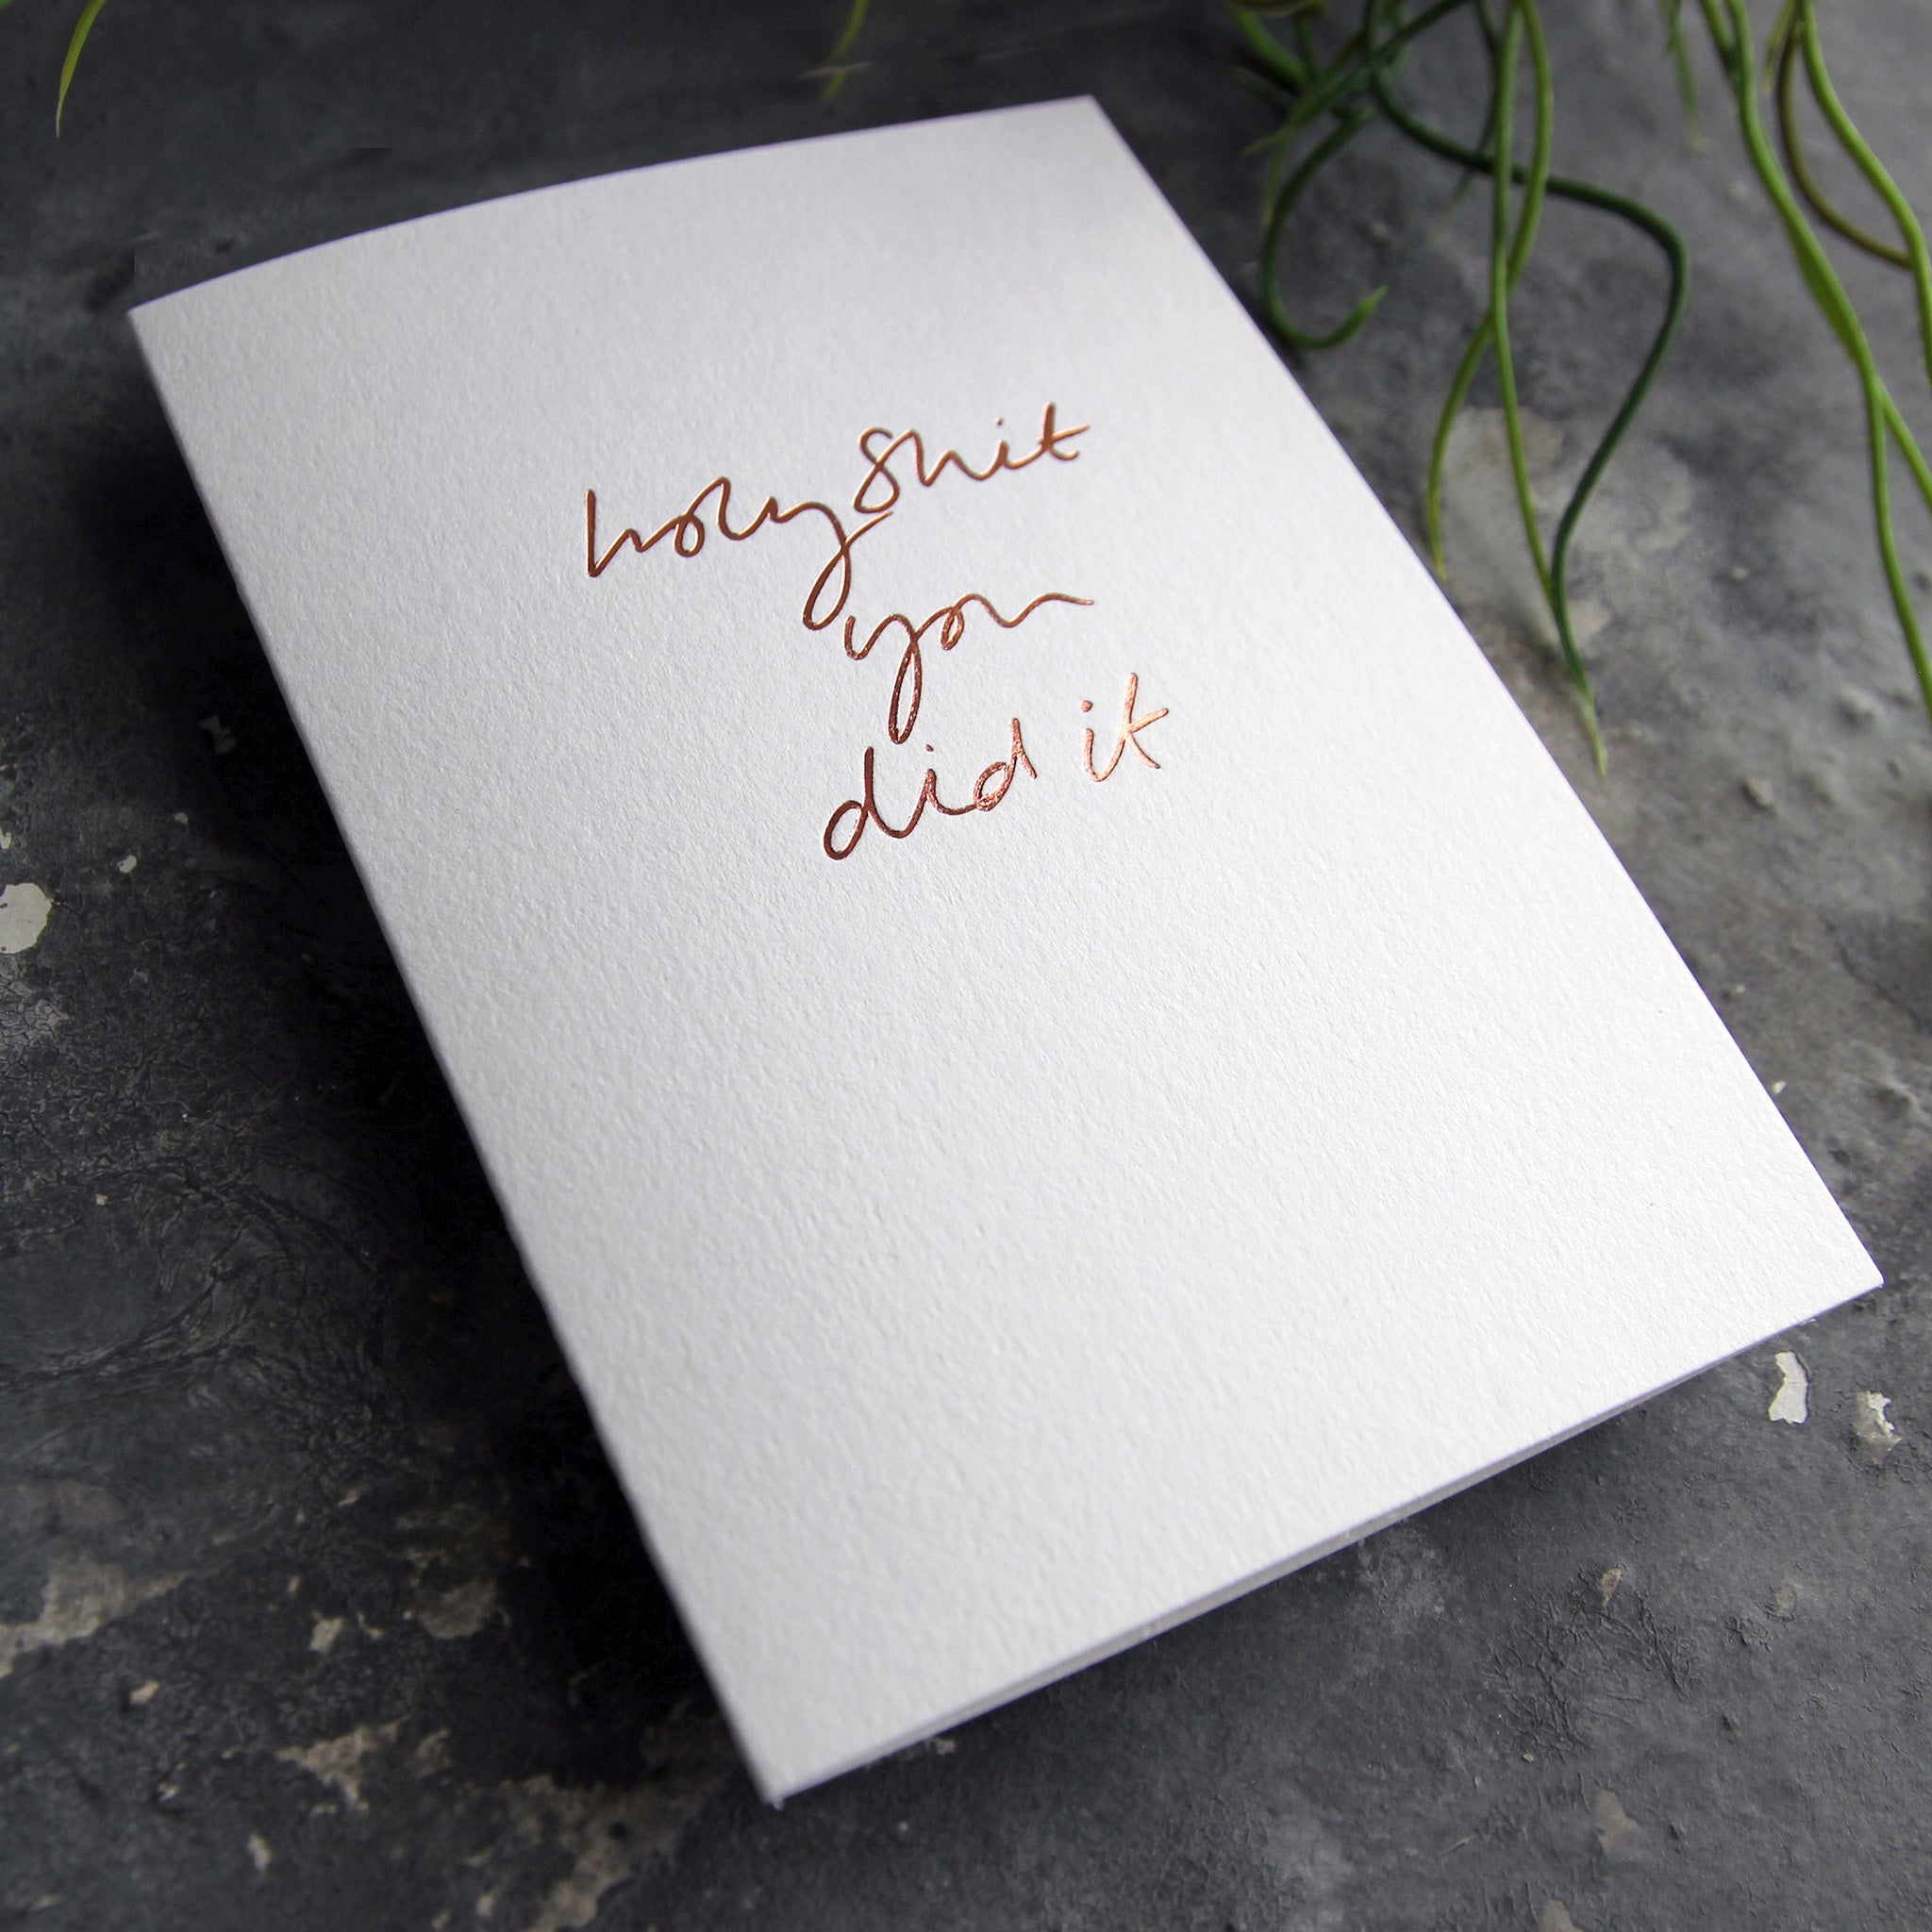 Luxury white greetings card with "Holy Shit You Did It' handwritten in the front and hand printed in rose gold foil on a grey background with some green plant leaves at the side.